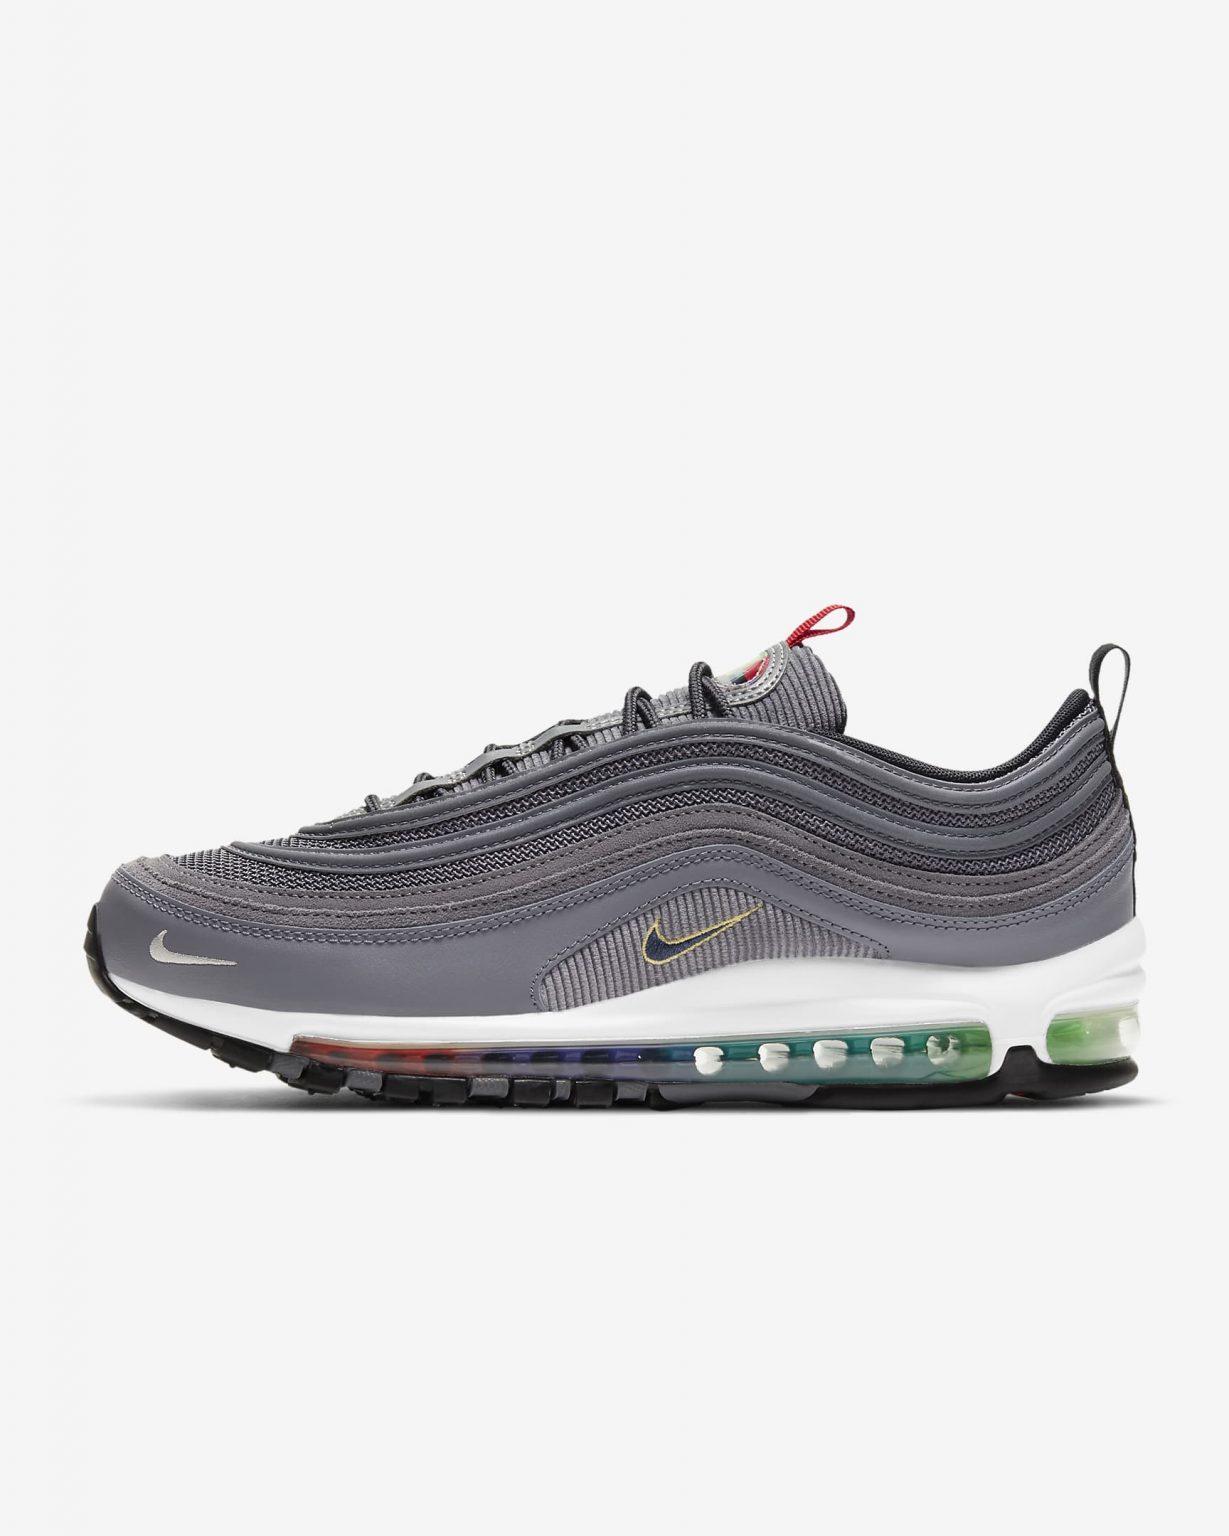 Nike Air Max 97 Size Chart and Fitting - Size-Charts.com